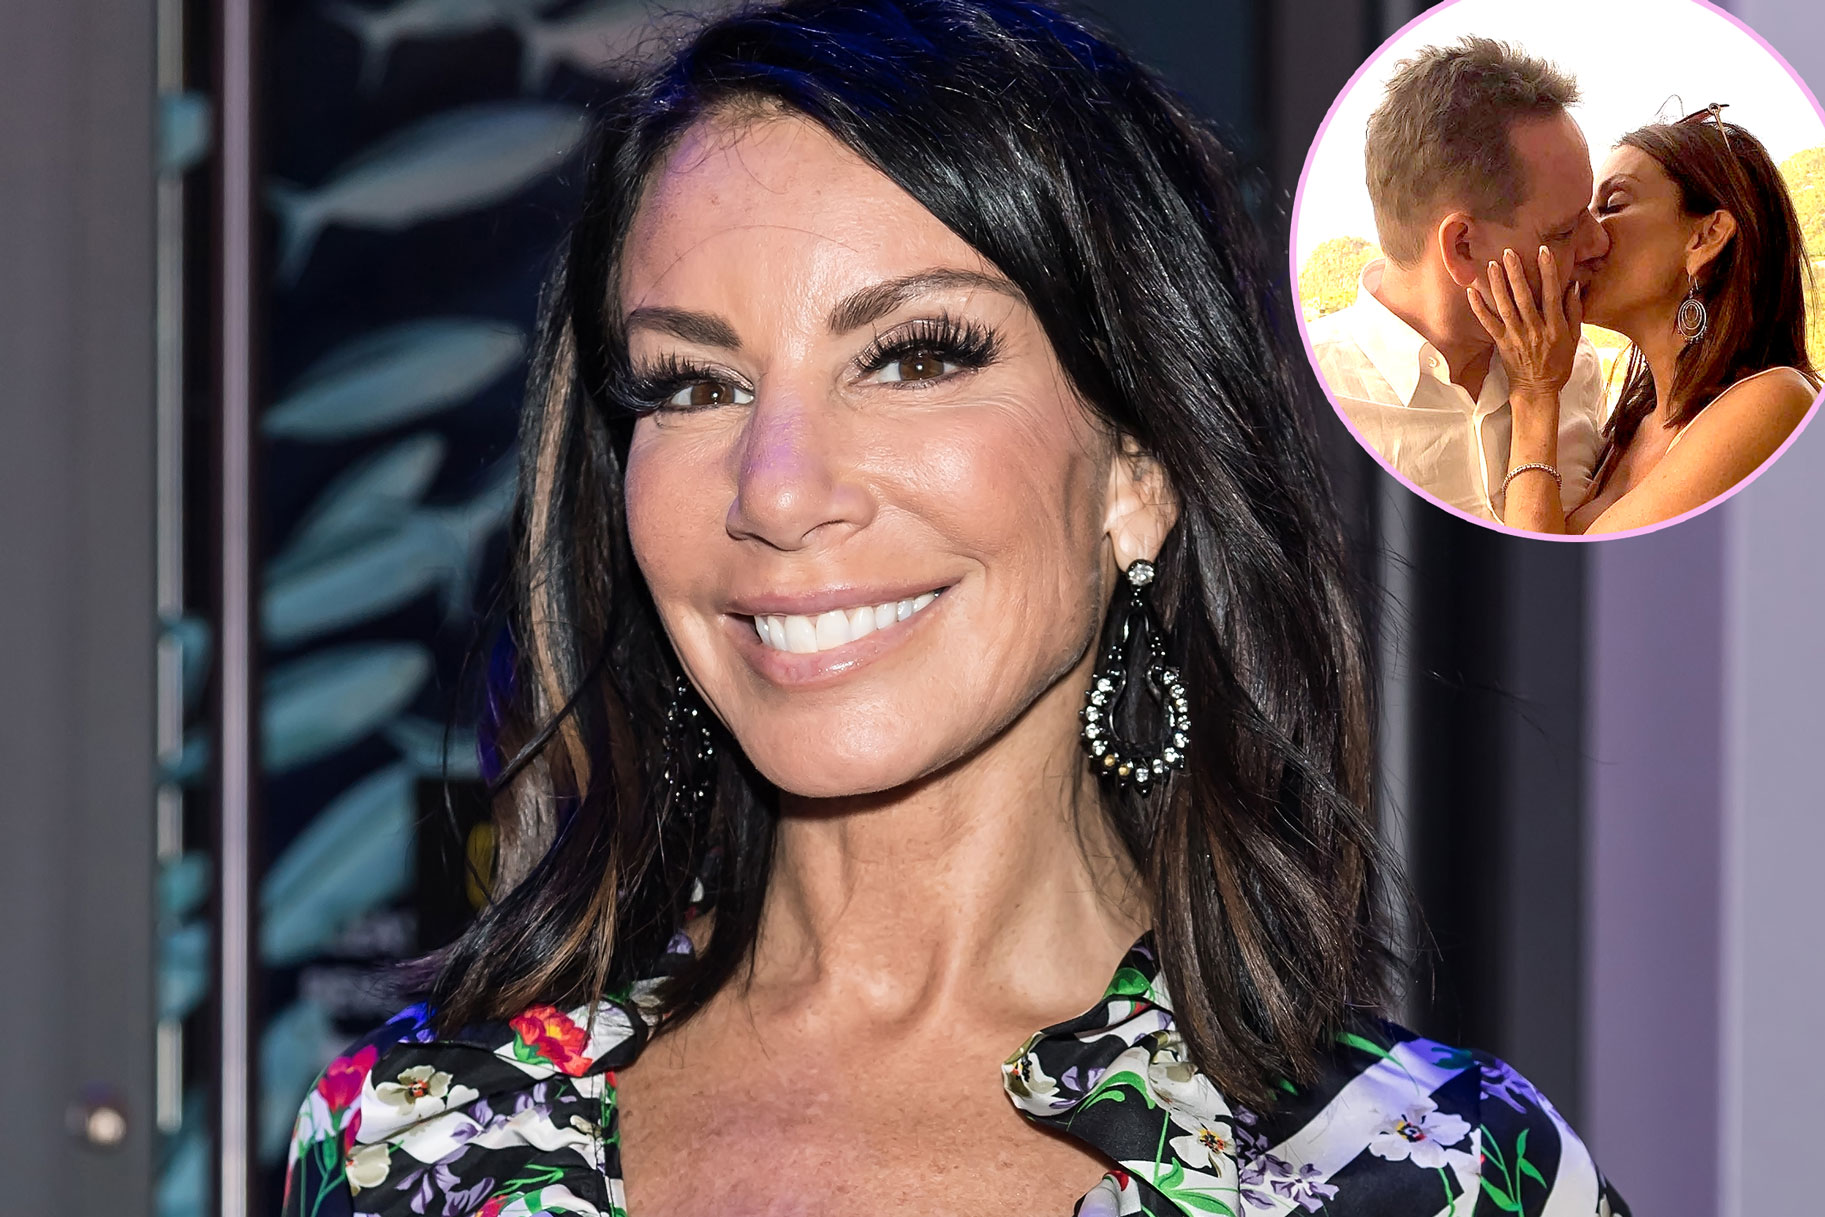 Danielle Staub with Fiance Oliver Maier